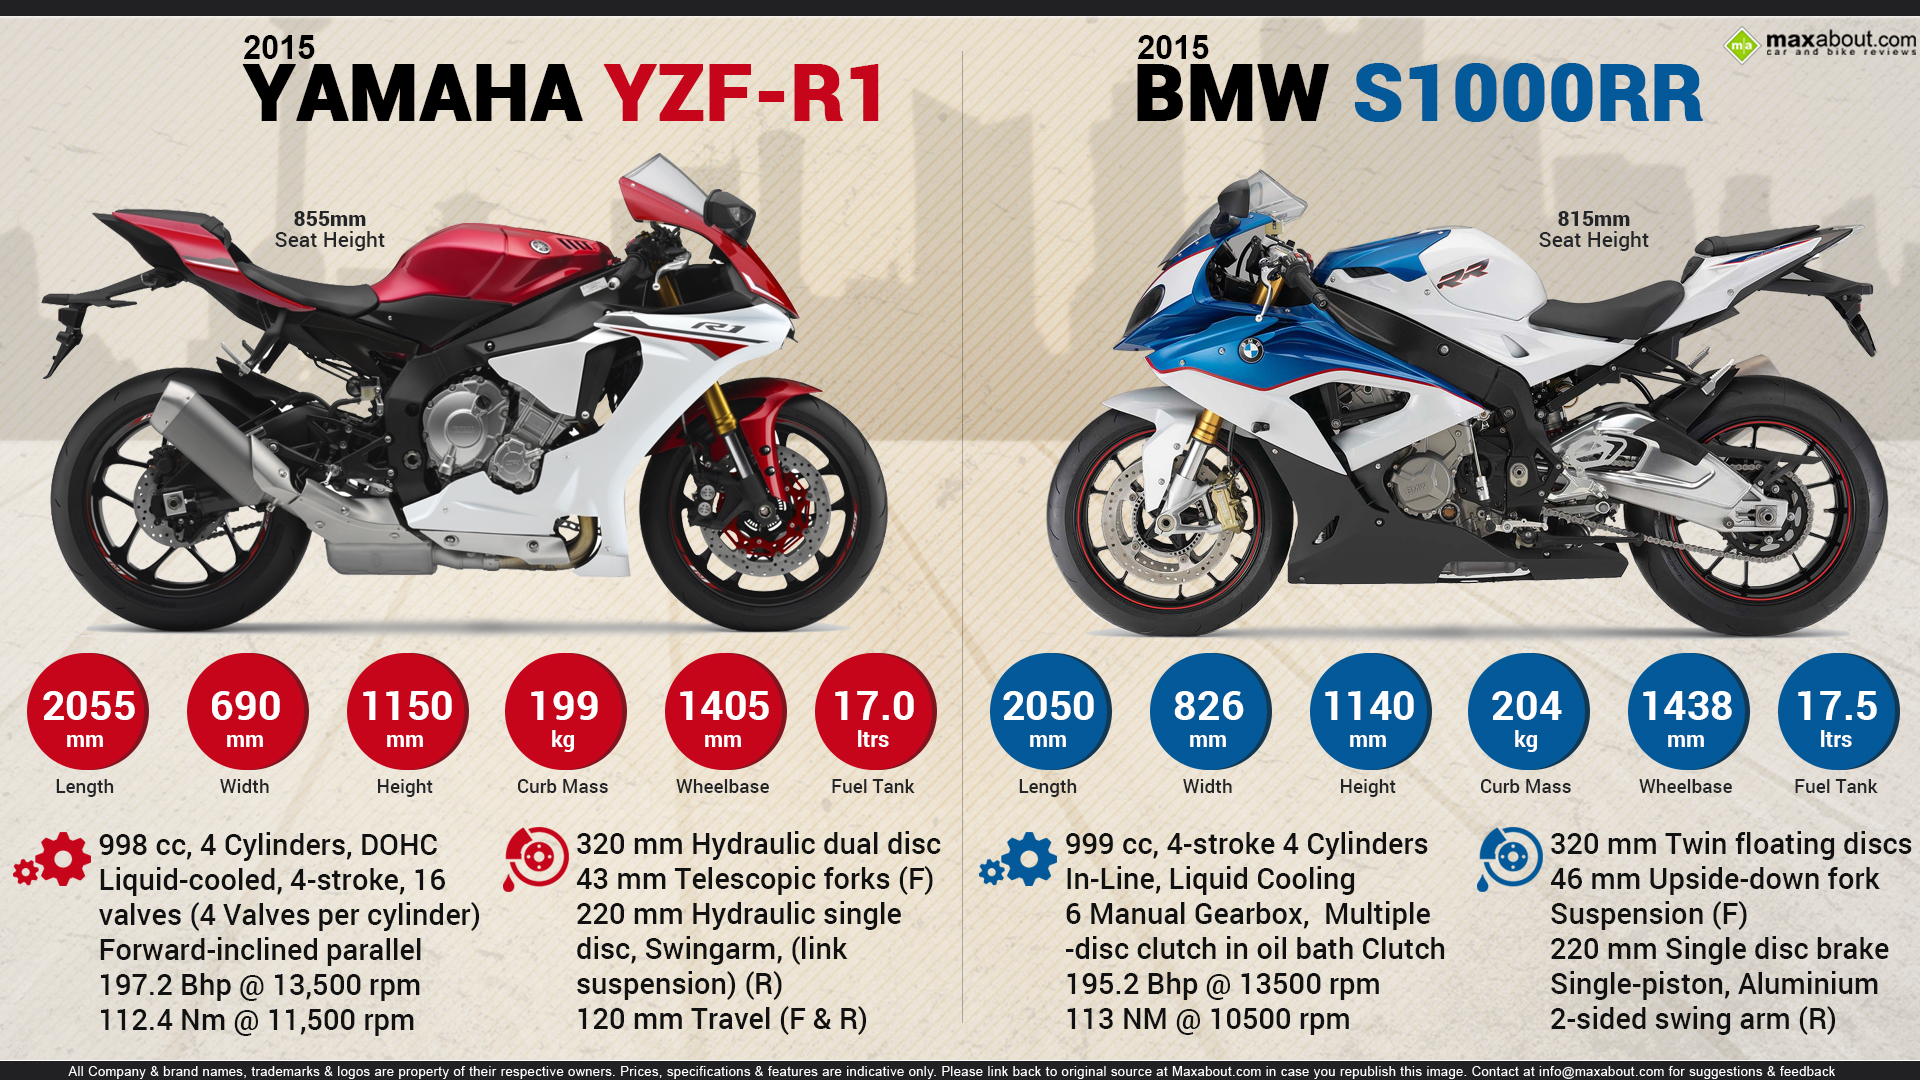 Yamaha Yzf R1 Vs Bmw S1000rr Quick Facts About